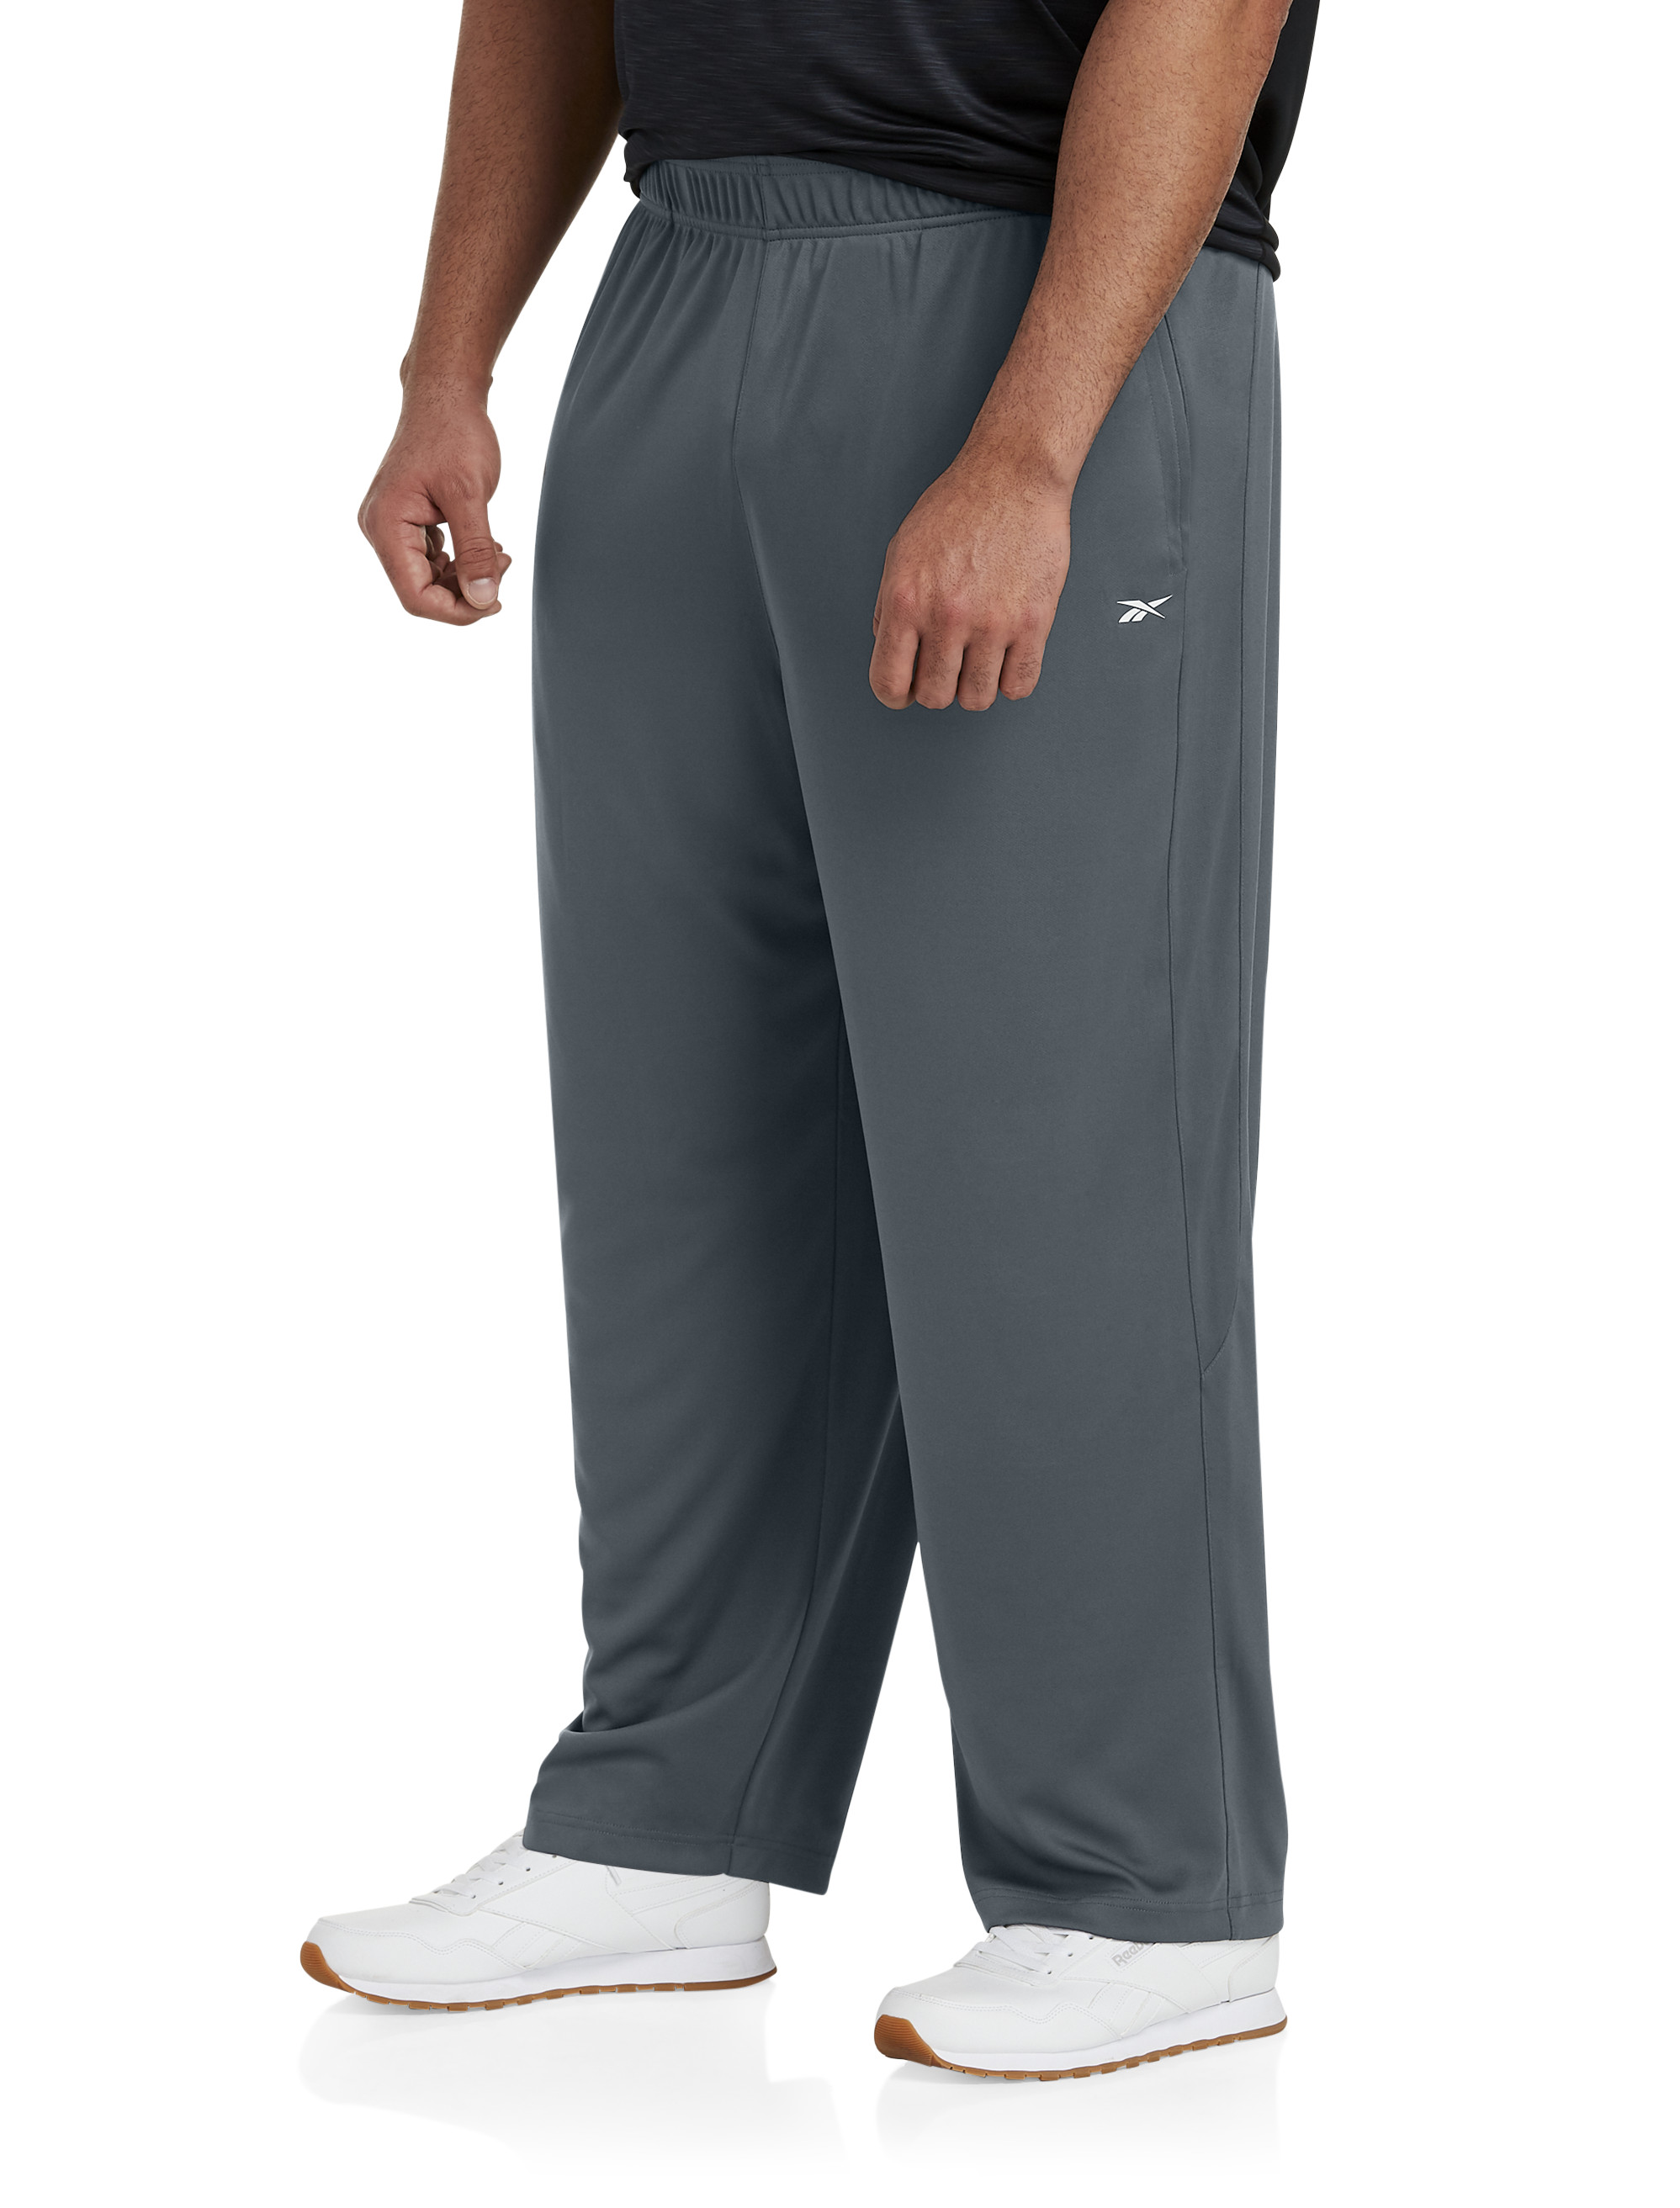 NEW 'Speedy' SLIM Tall Men's Athletic Pants - 5 Colors to Choose From!